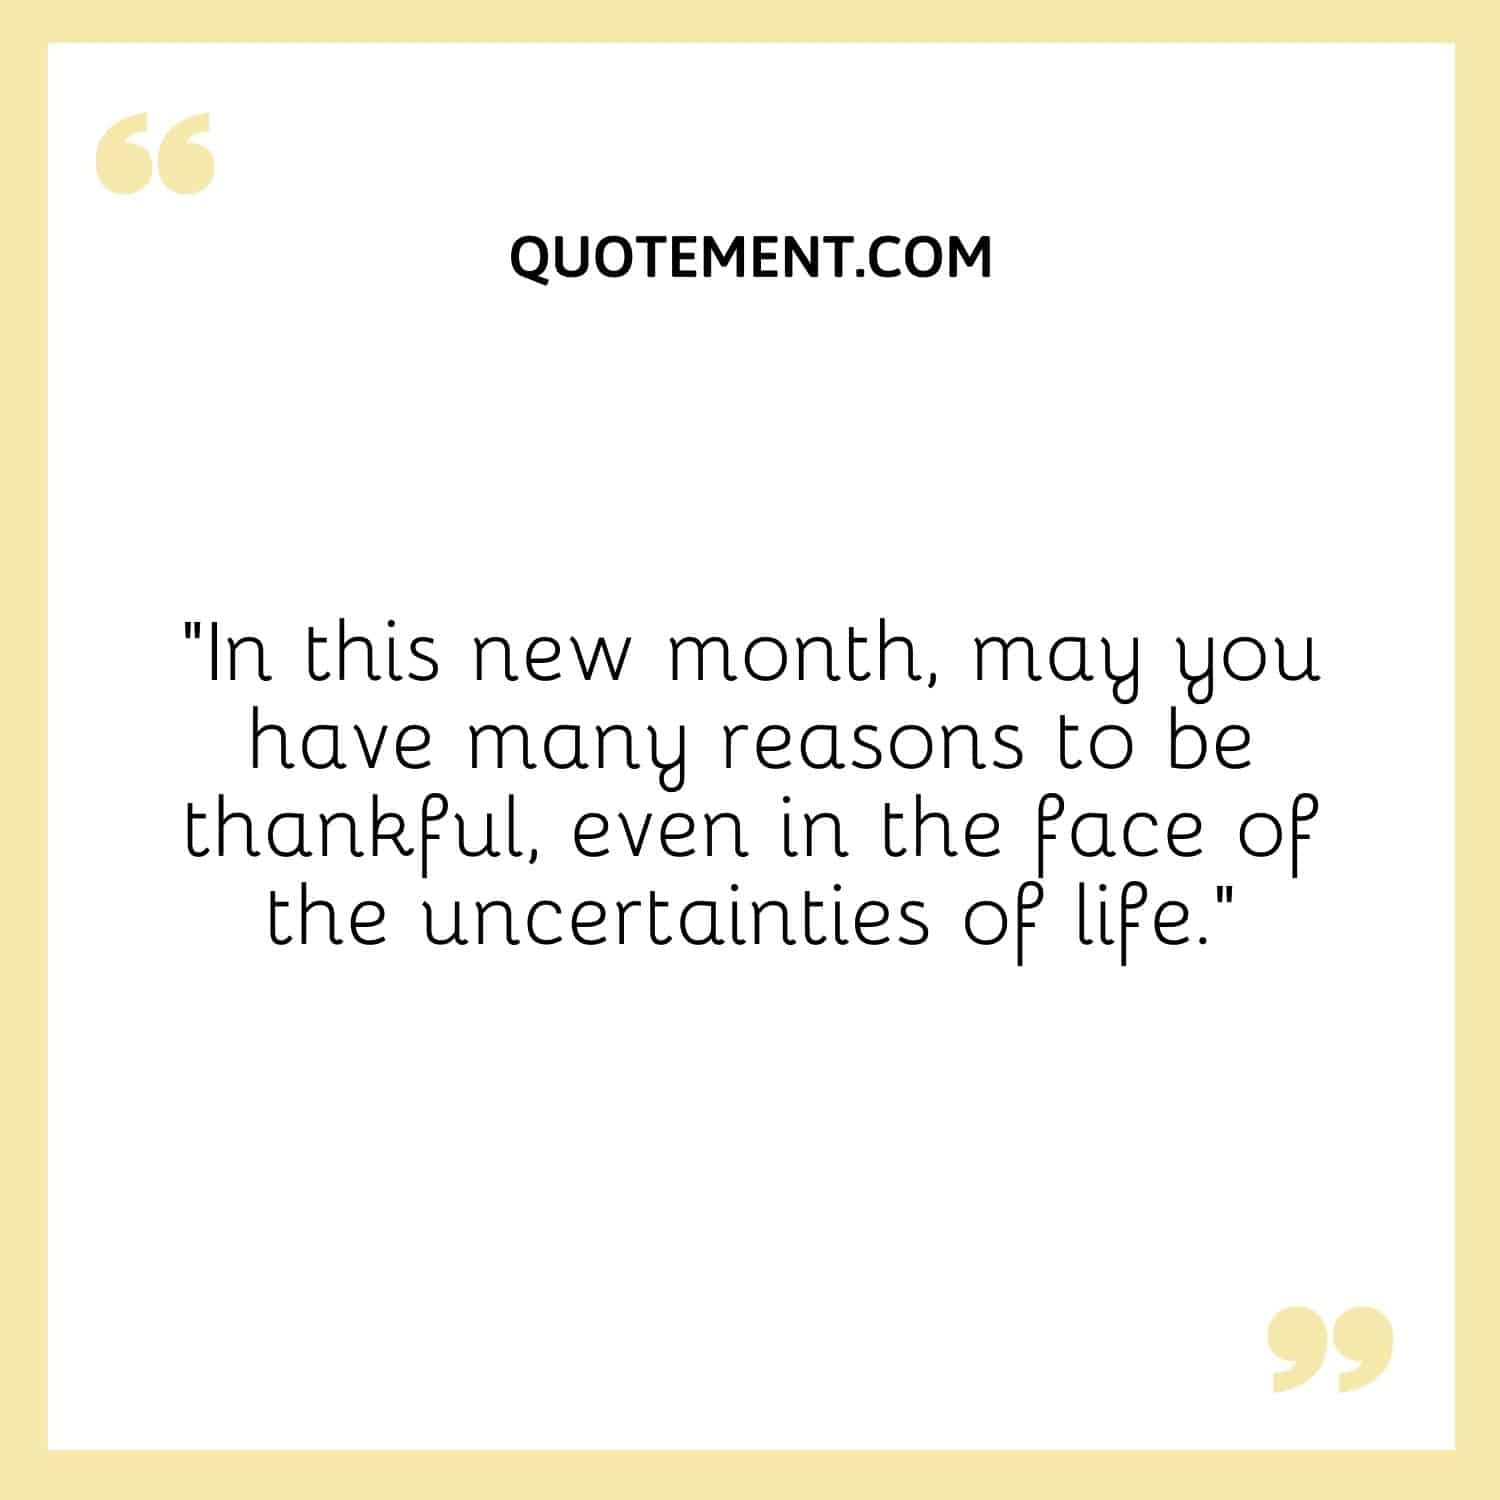 In this new month, may you have many reasons to be thankful, even in the face of the uncertainties of life